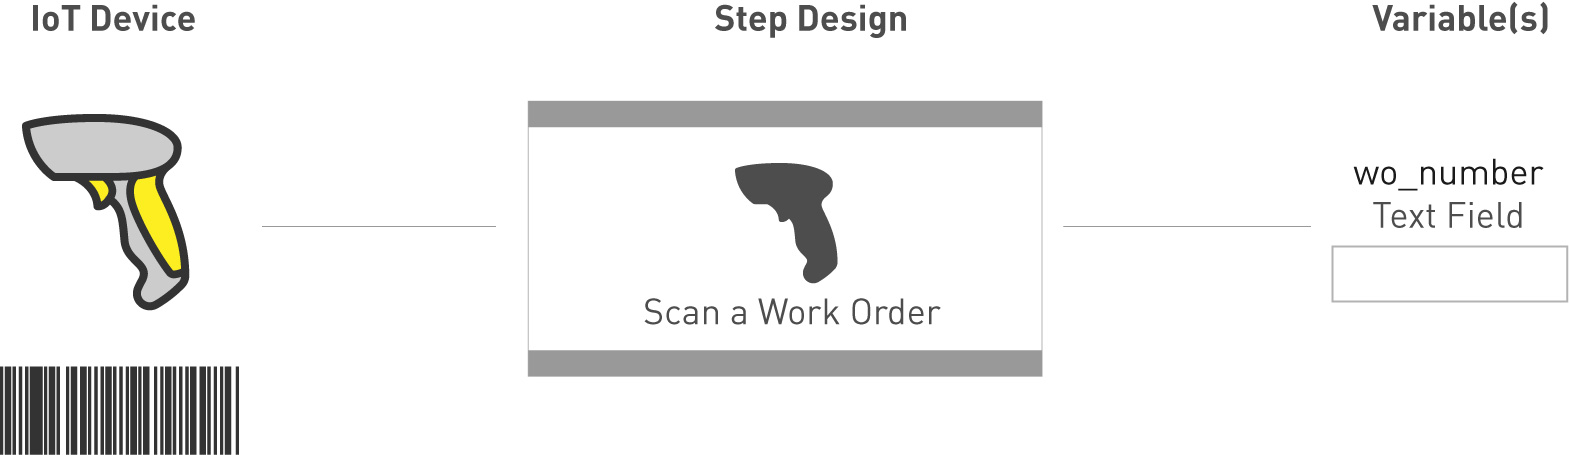 How To Build A Digital Work Instructions App_89041158.png